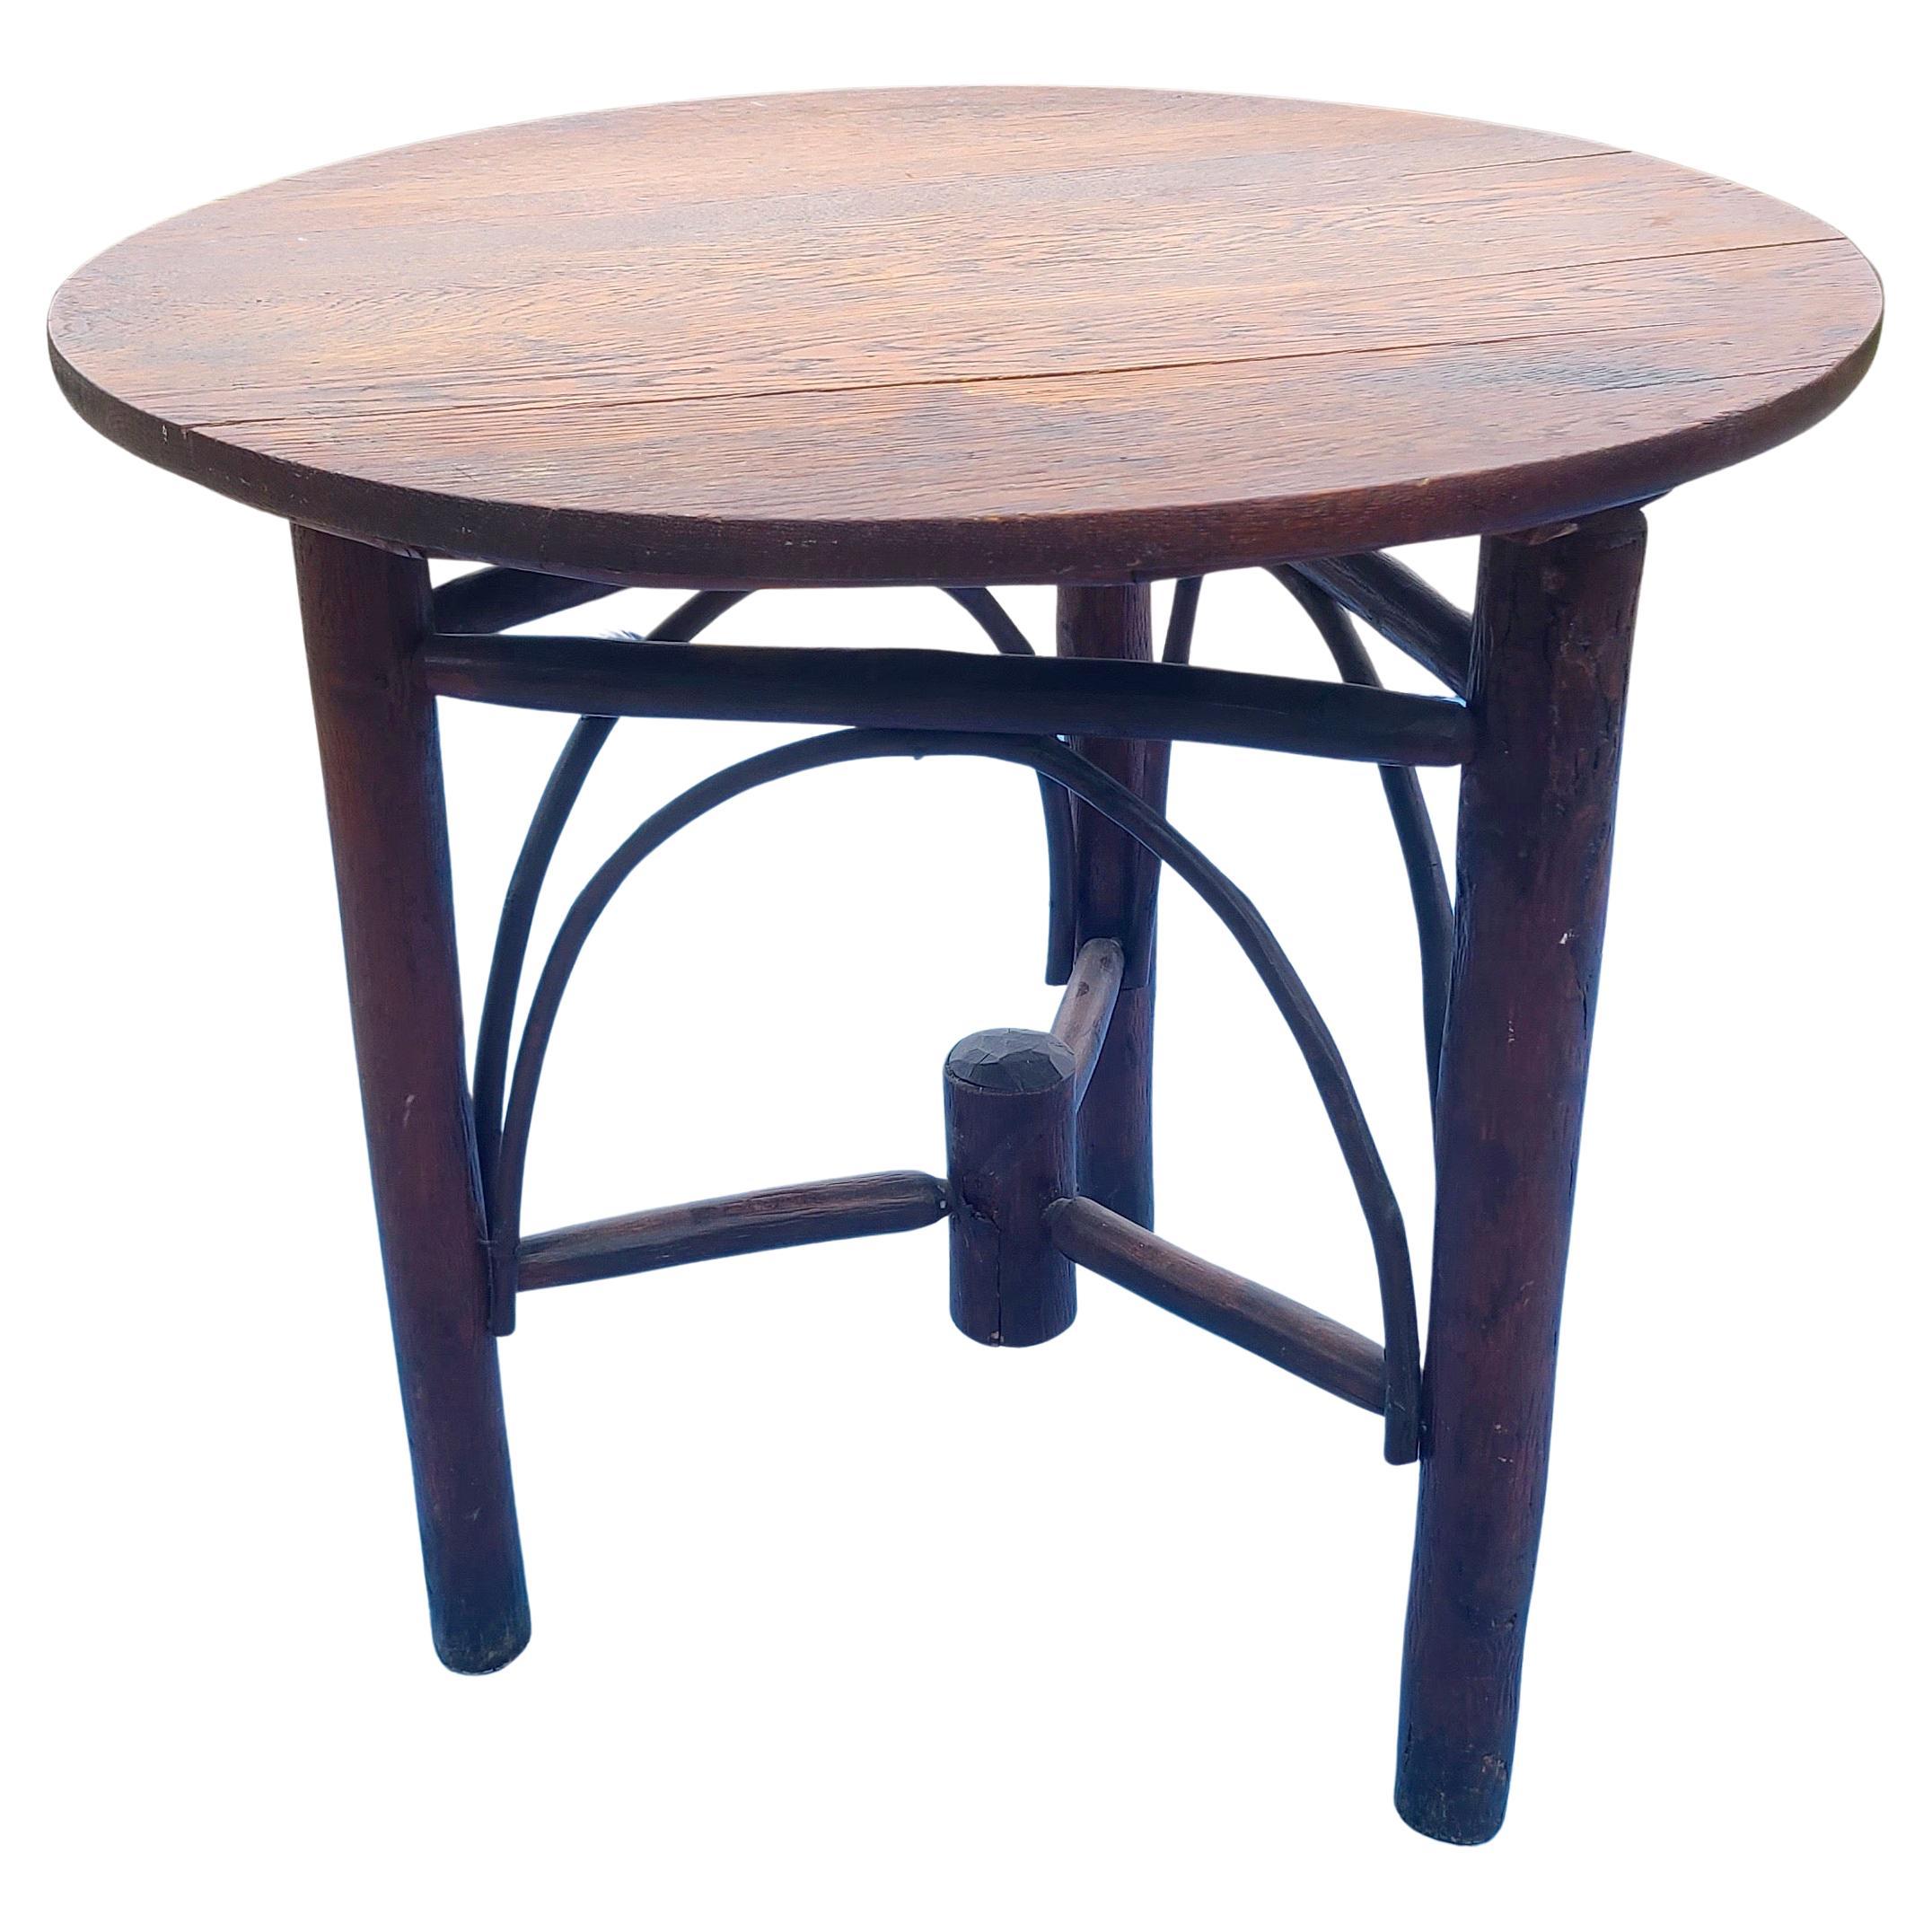 Tavern Table by Old Hickory Arts & Crafts Mission